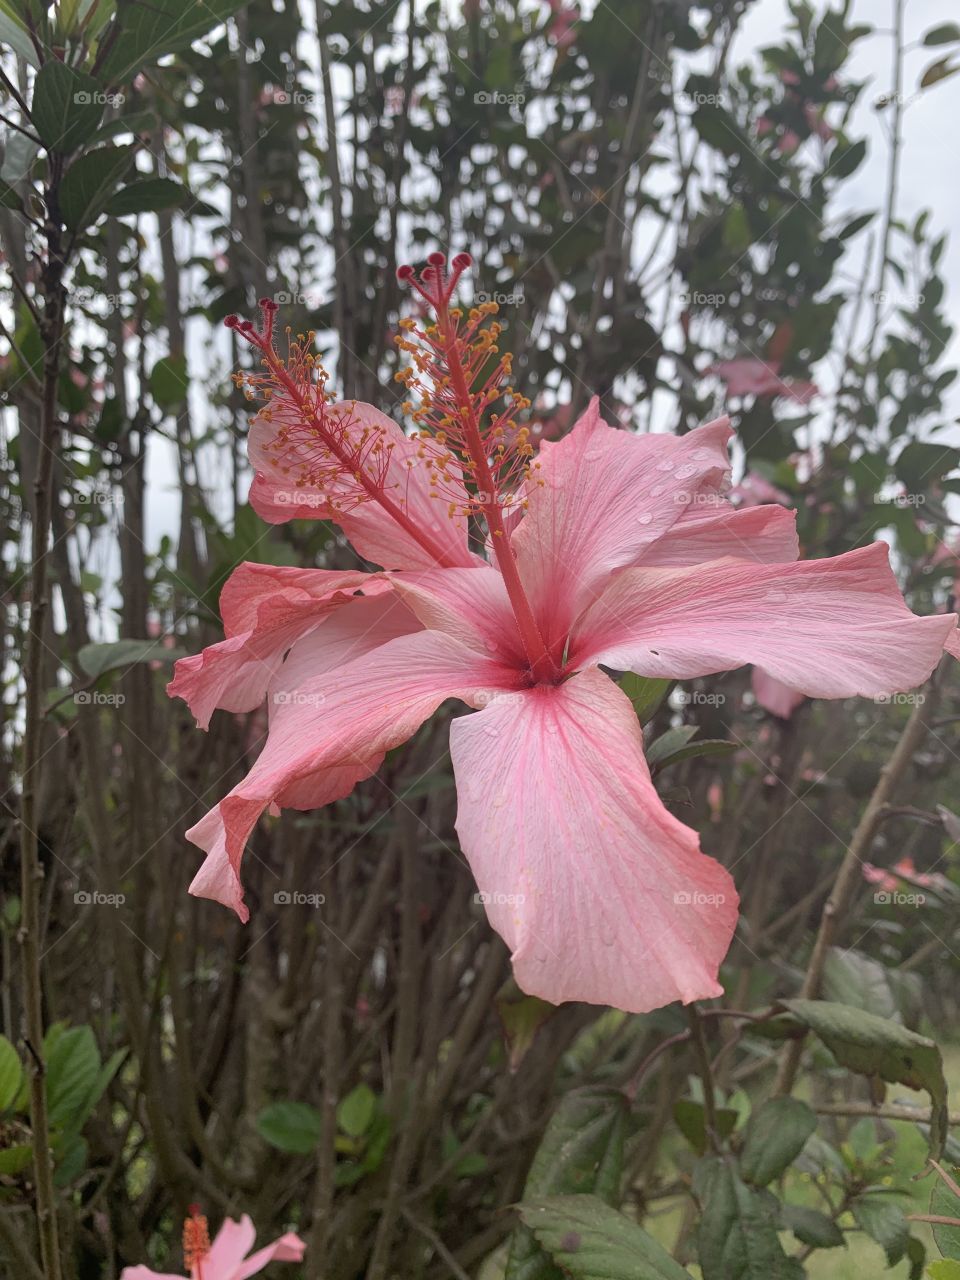 A beautiful hibiscus flower stands tall and proud. With its vibrant pink and red colors, it is one of the many reasons native Ecuadorian Highlanders love these flowers. 